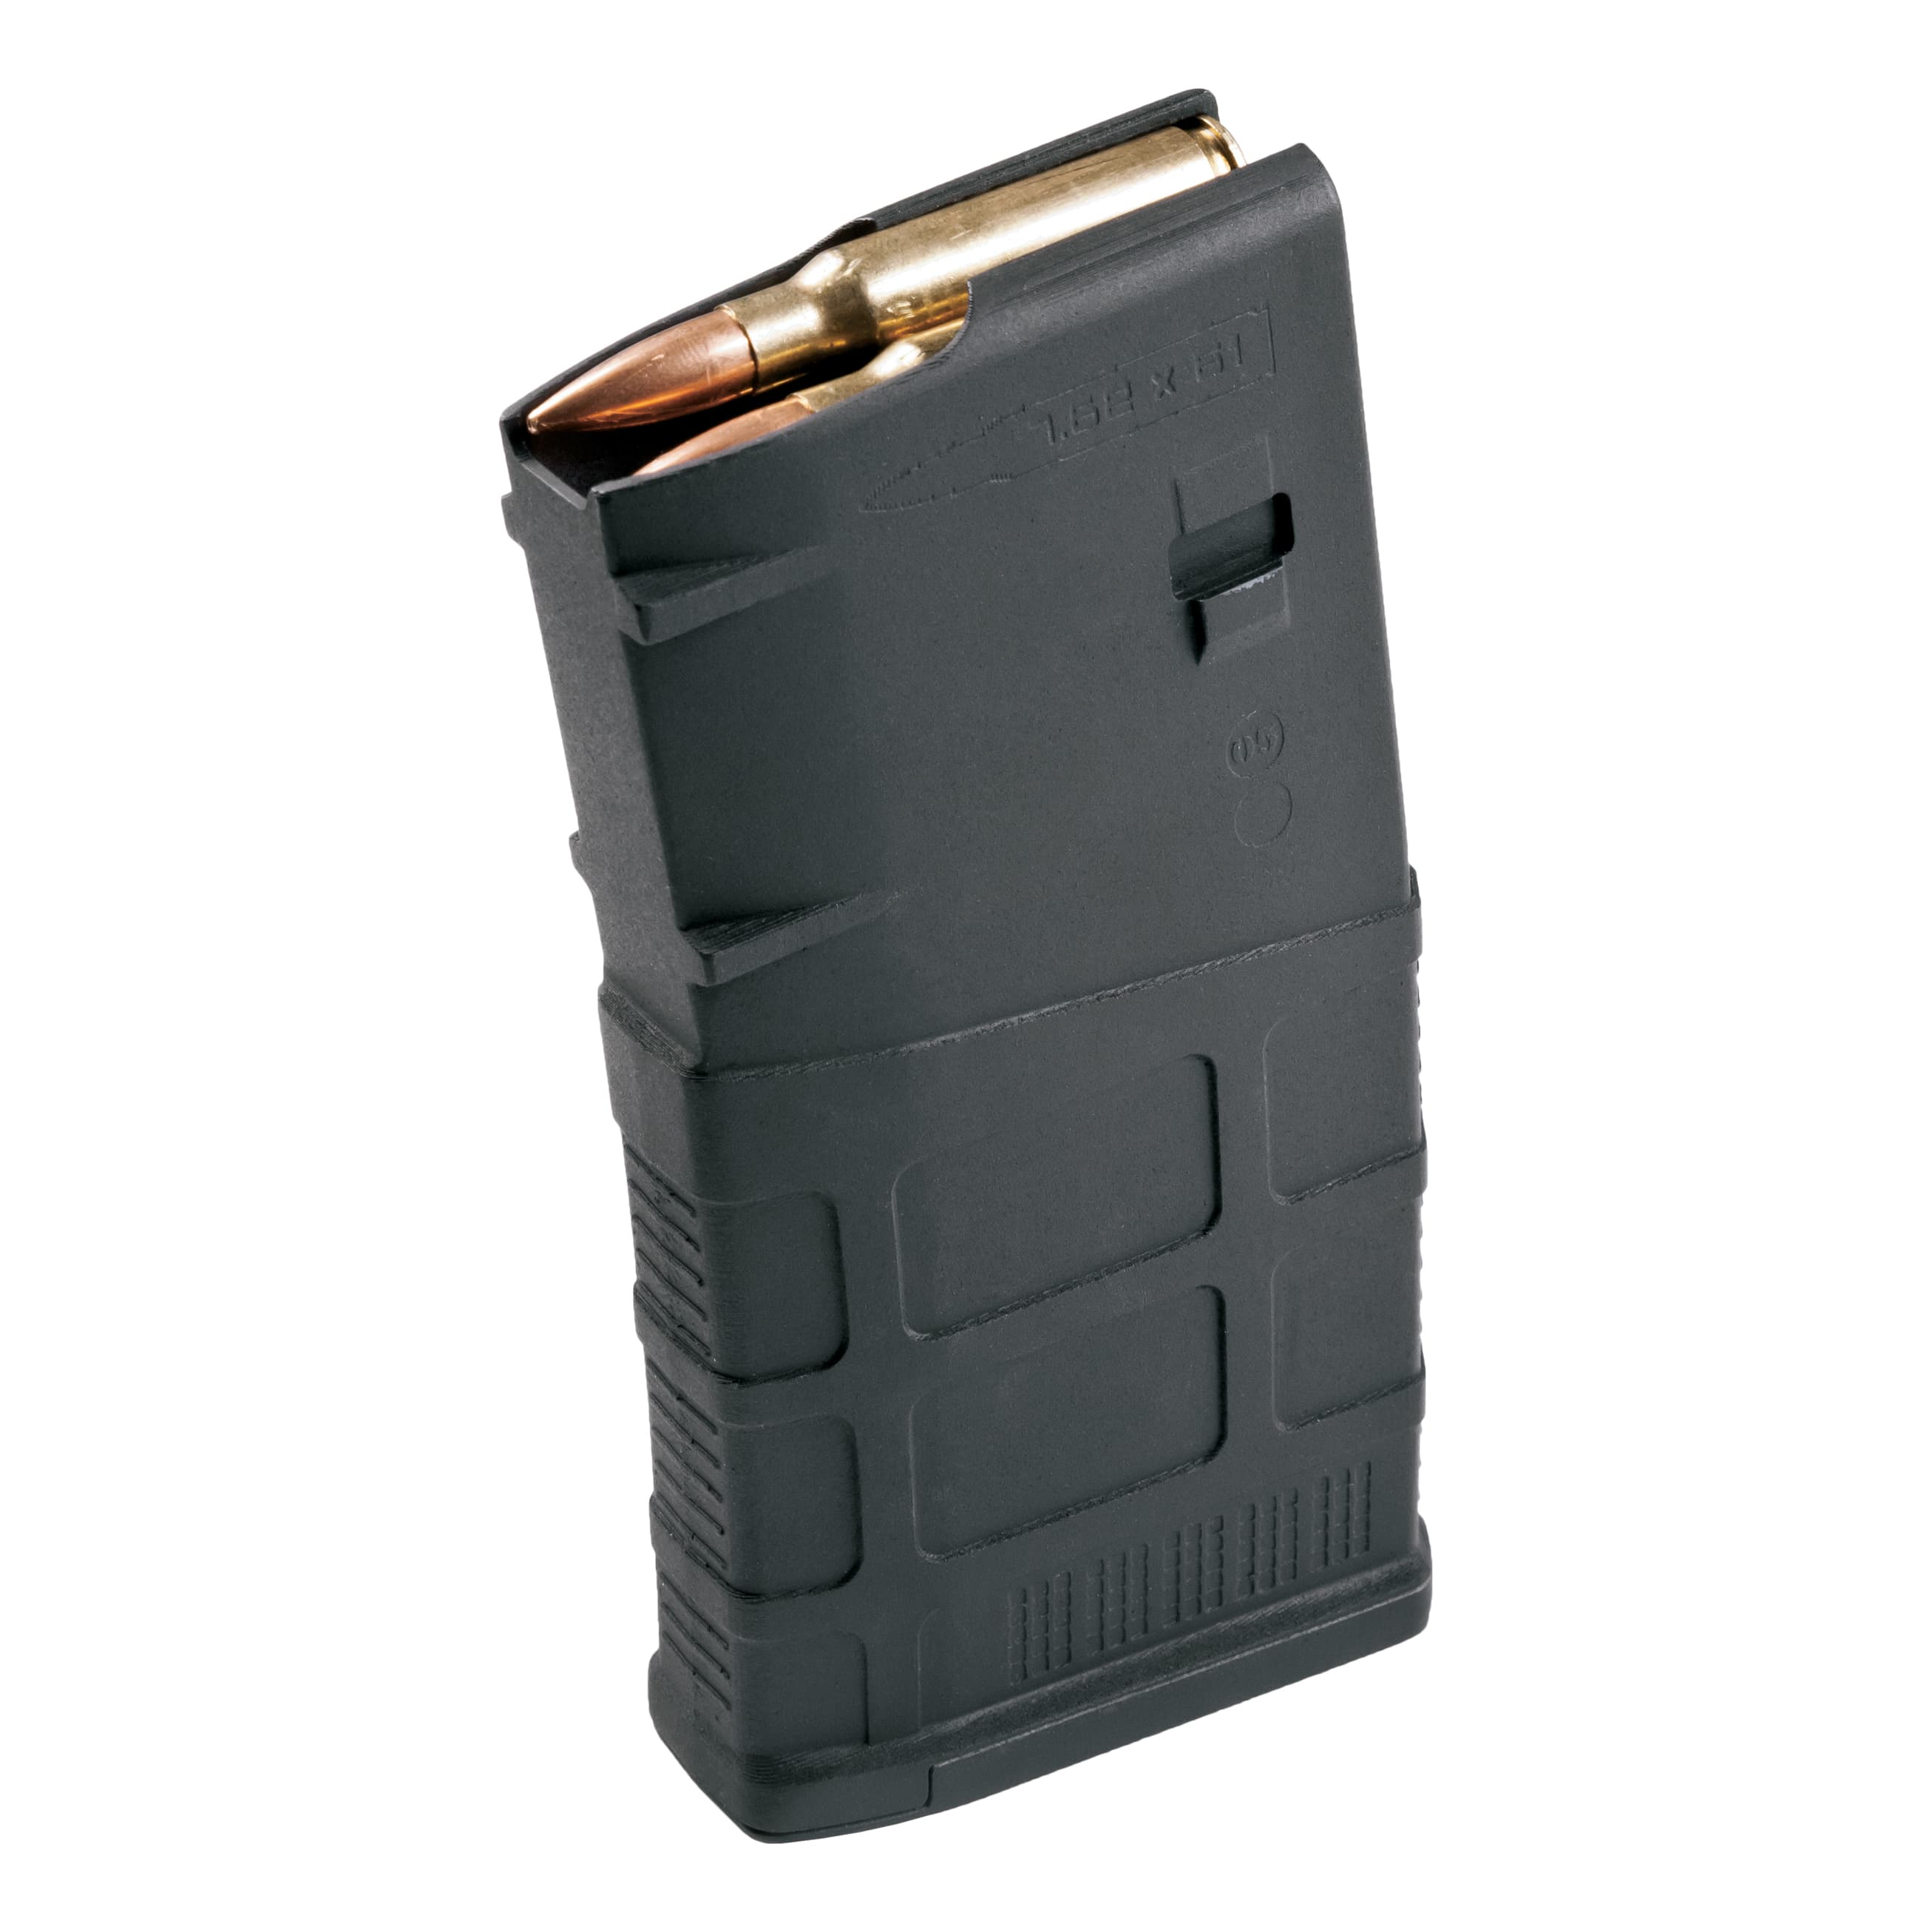 Tactical Firearm Accessories: Picatinny Rails, Shell Holders, & More